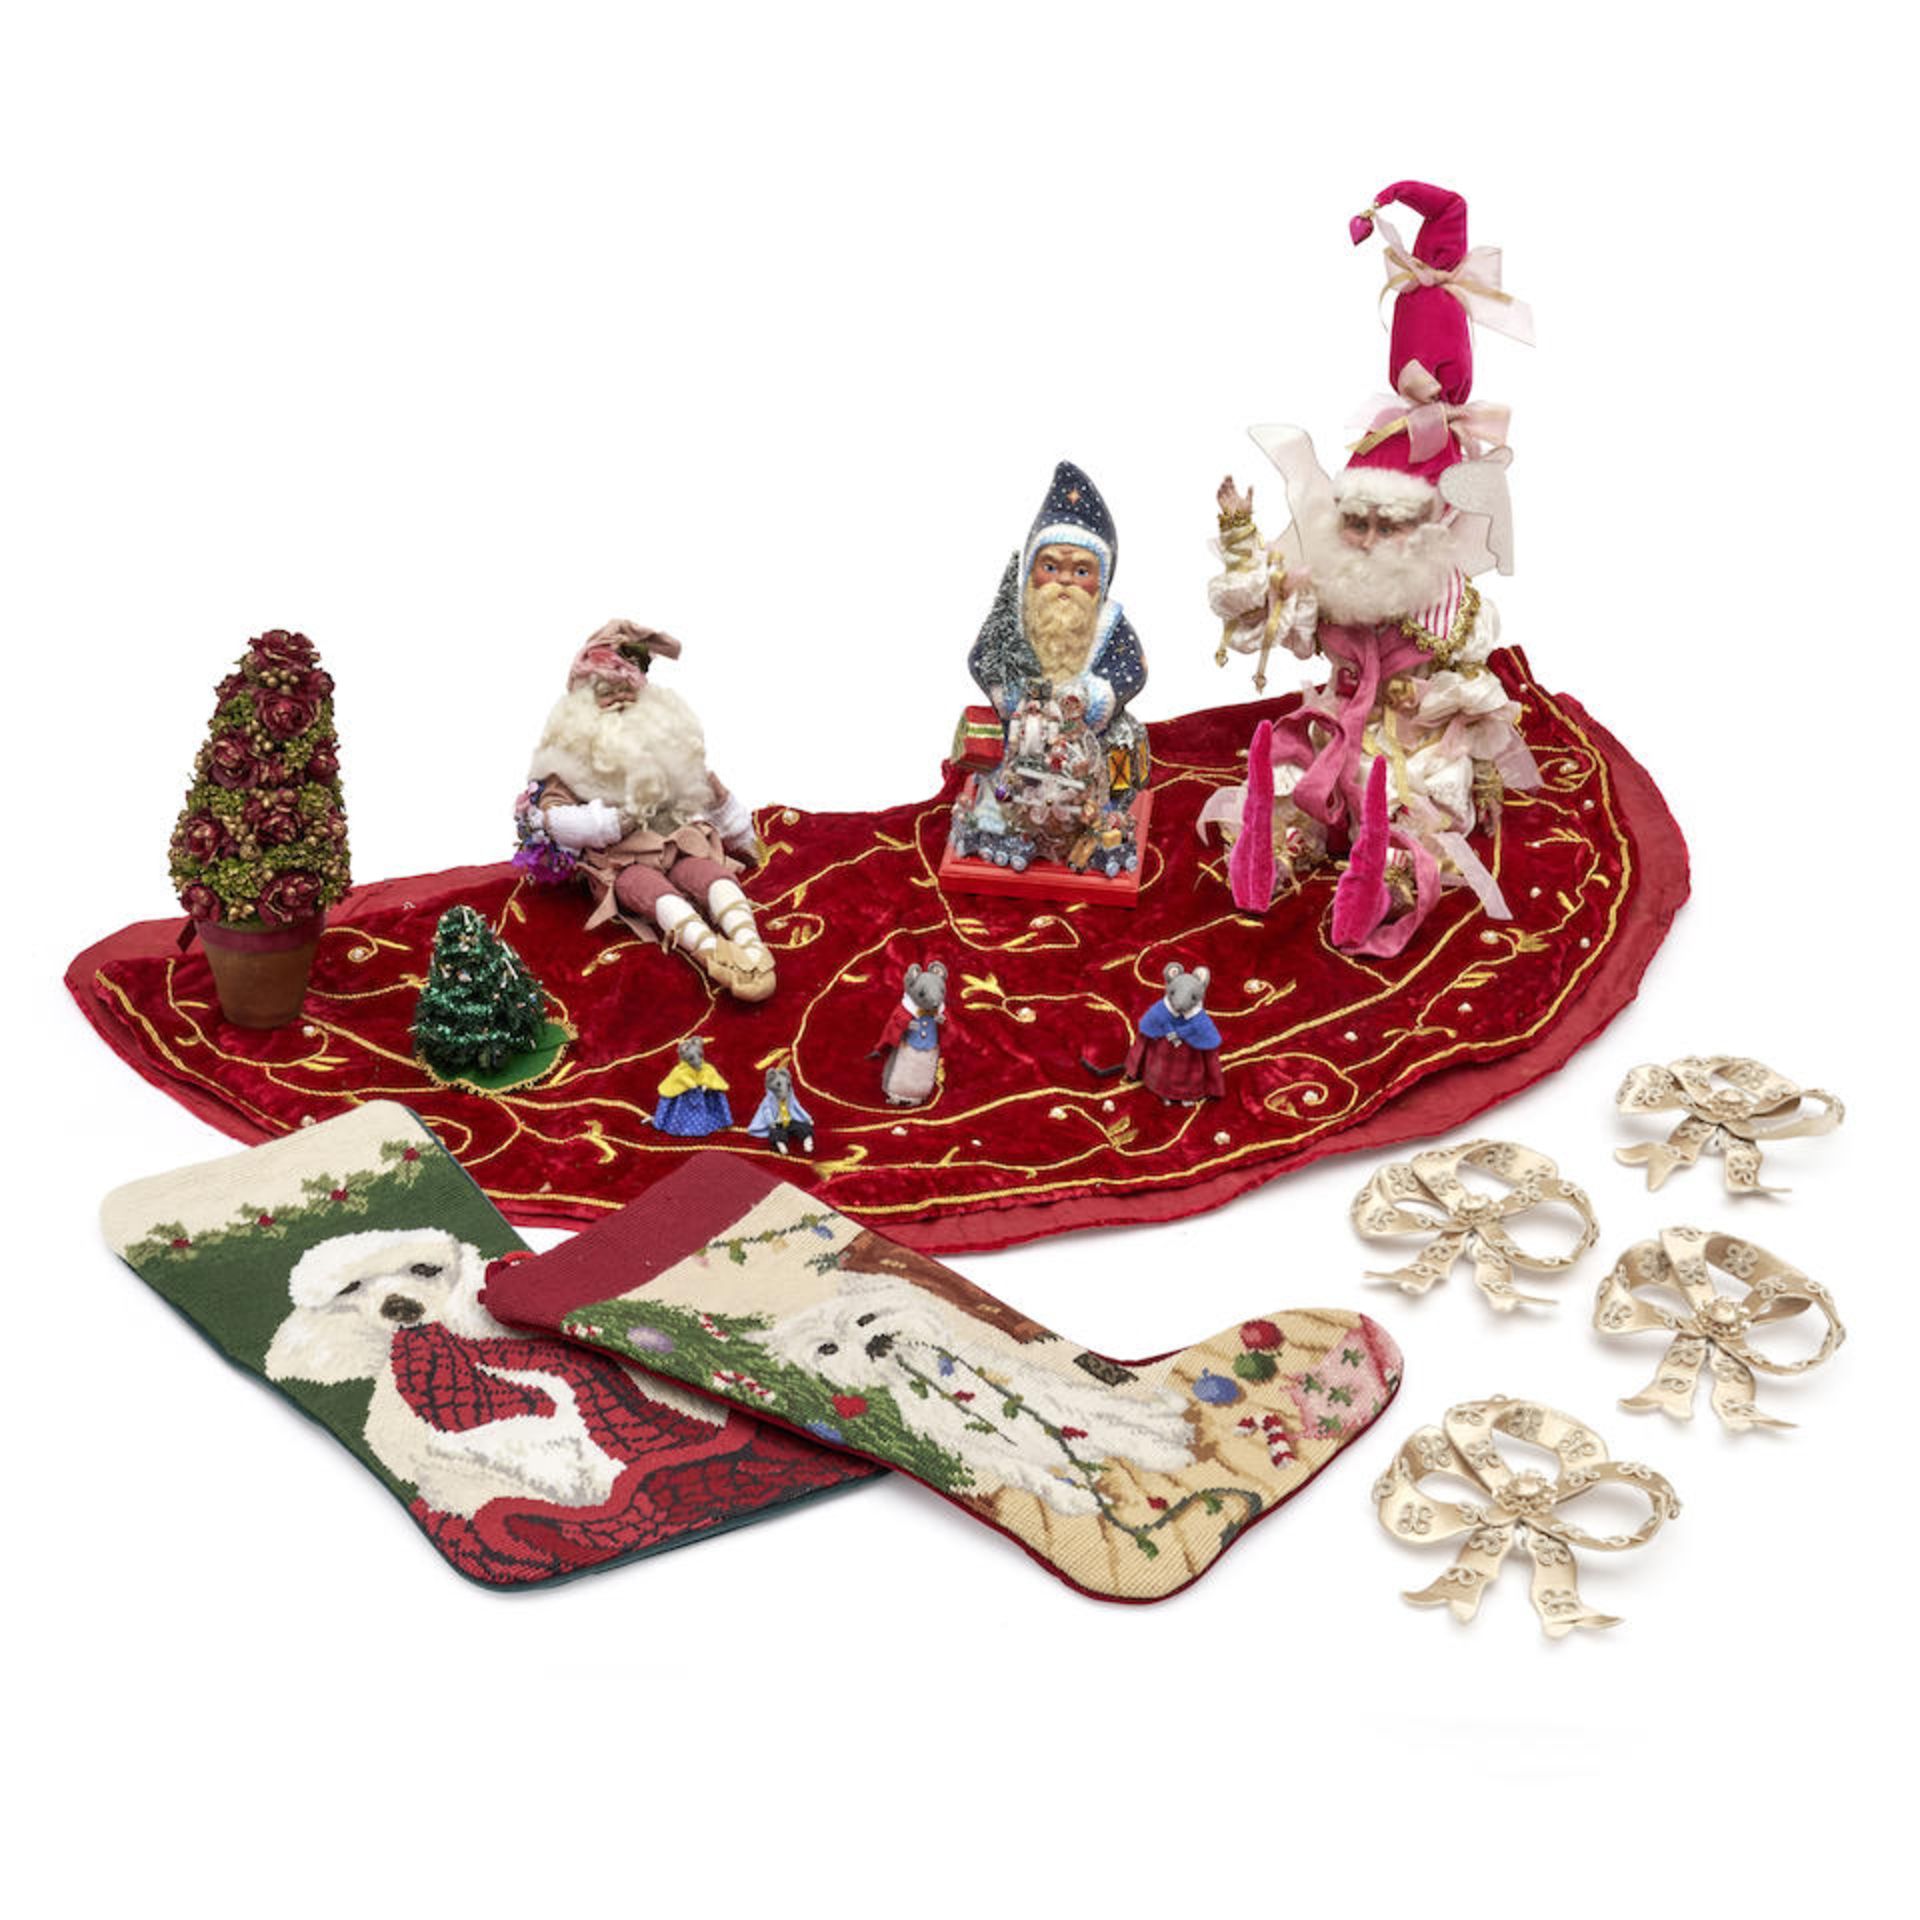 Group of Christmas Related and Decorative Items